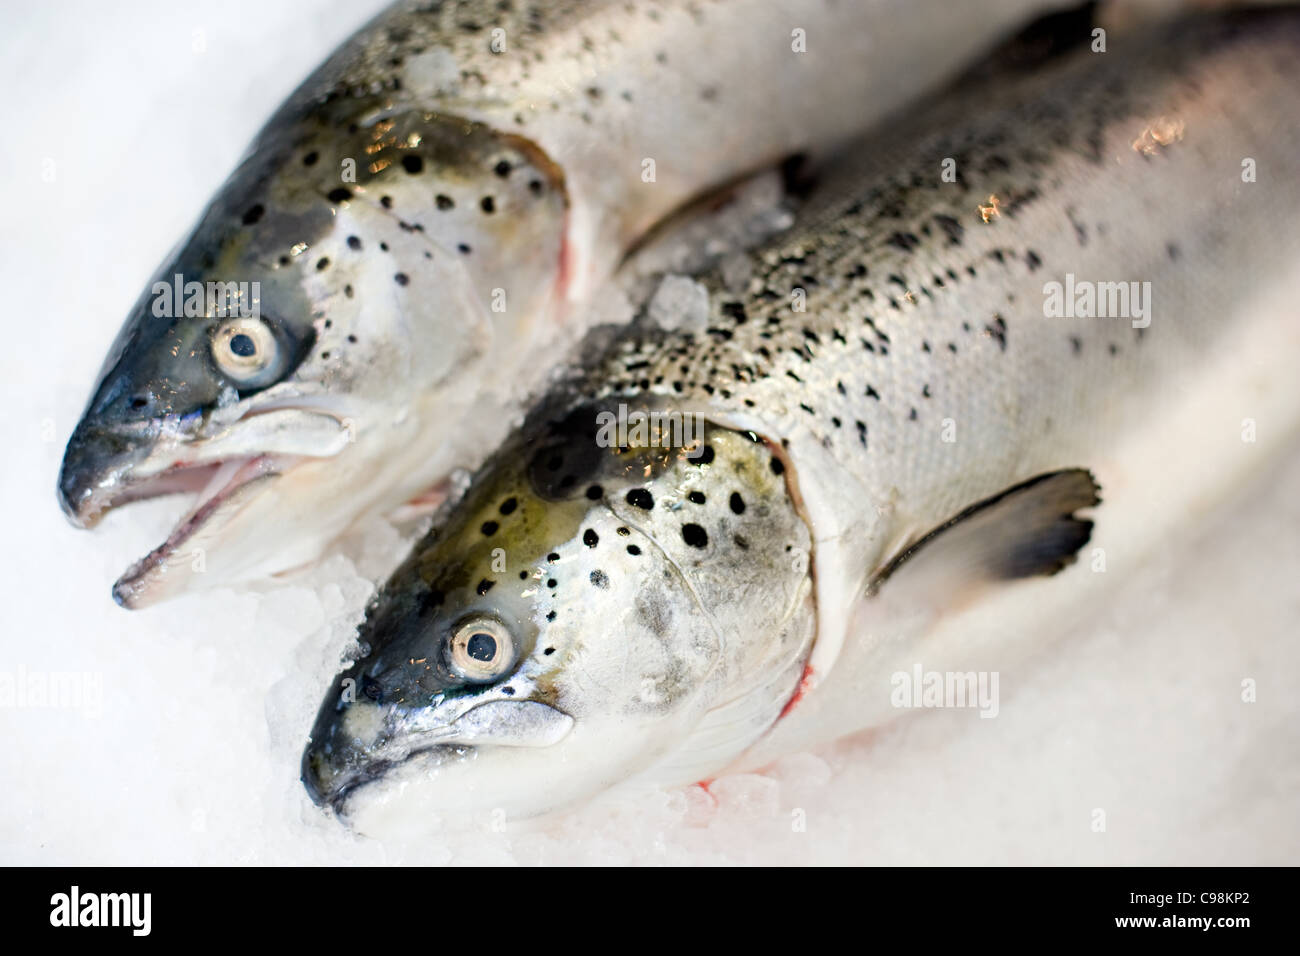 Two trout side by side on ice Stock Photo